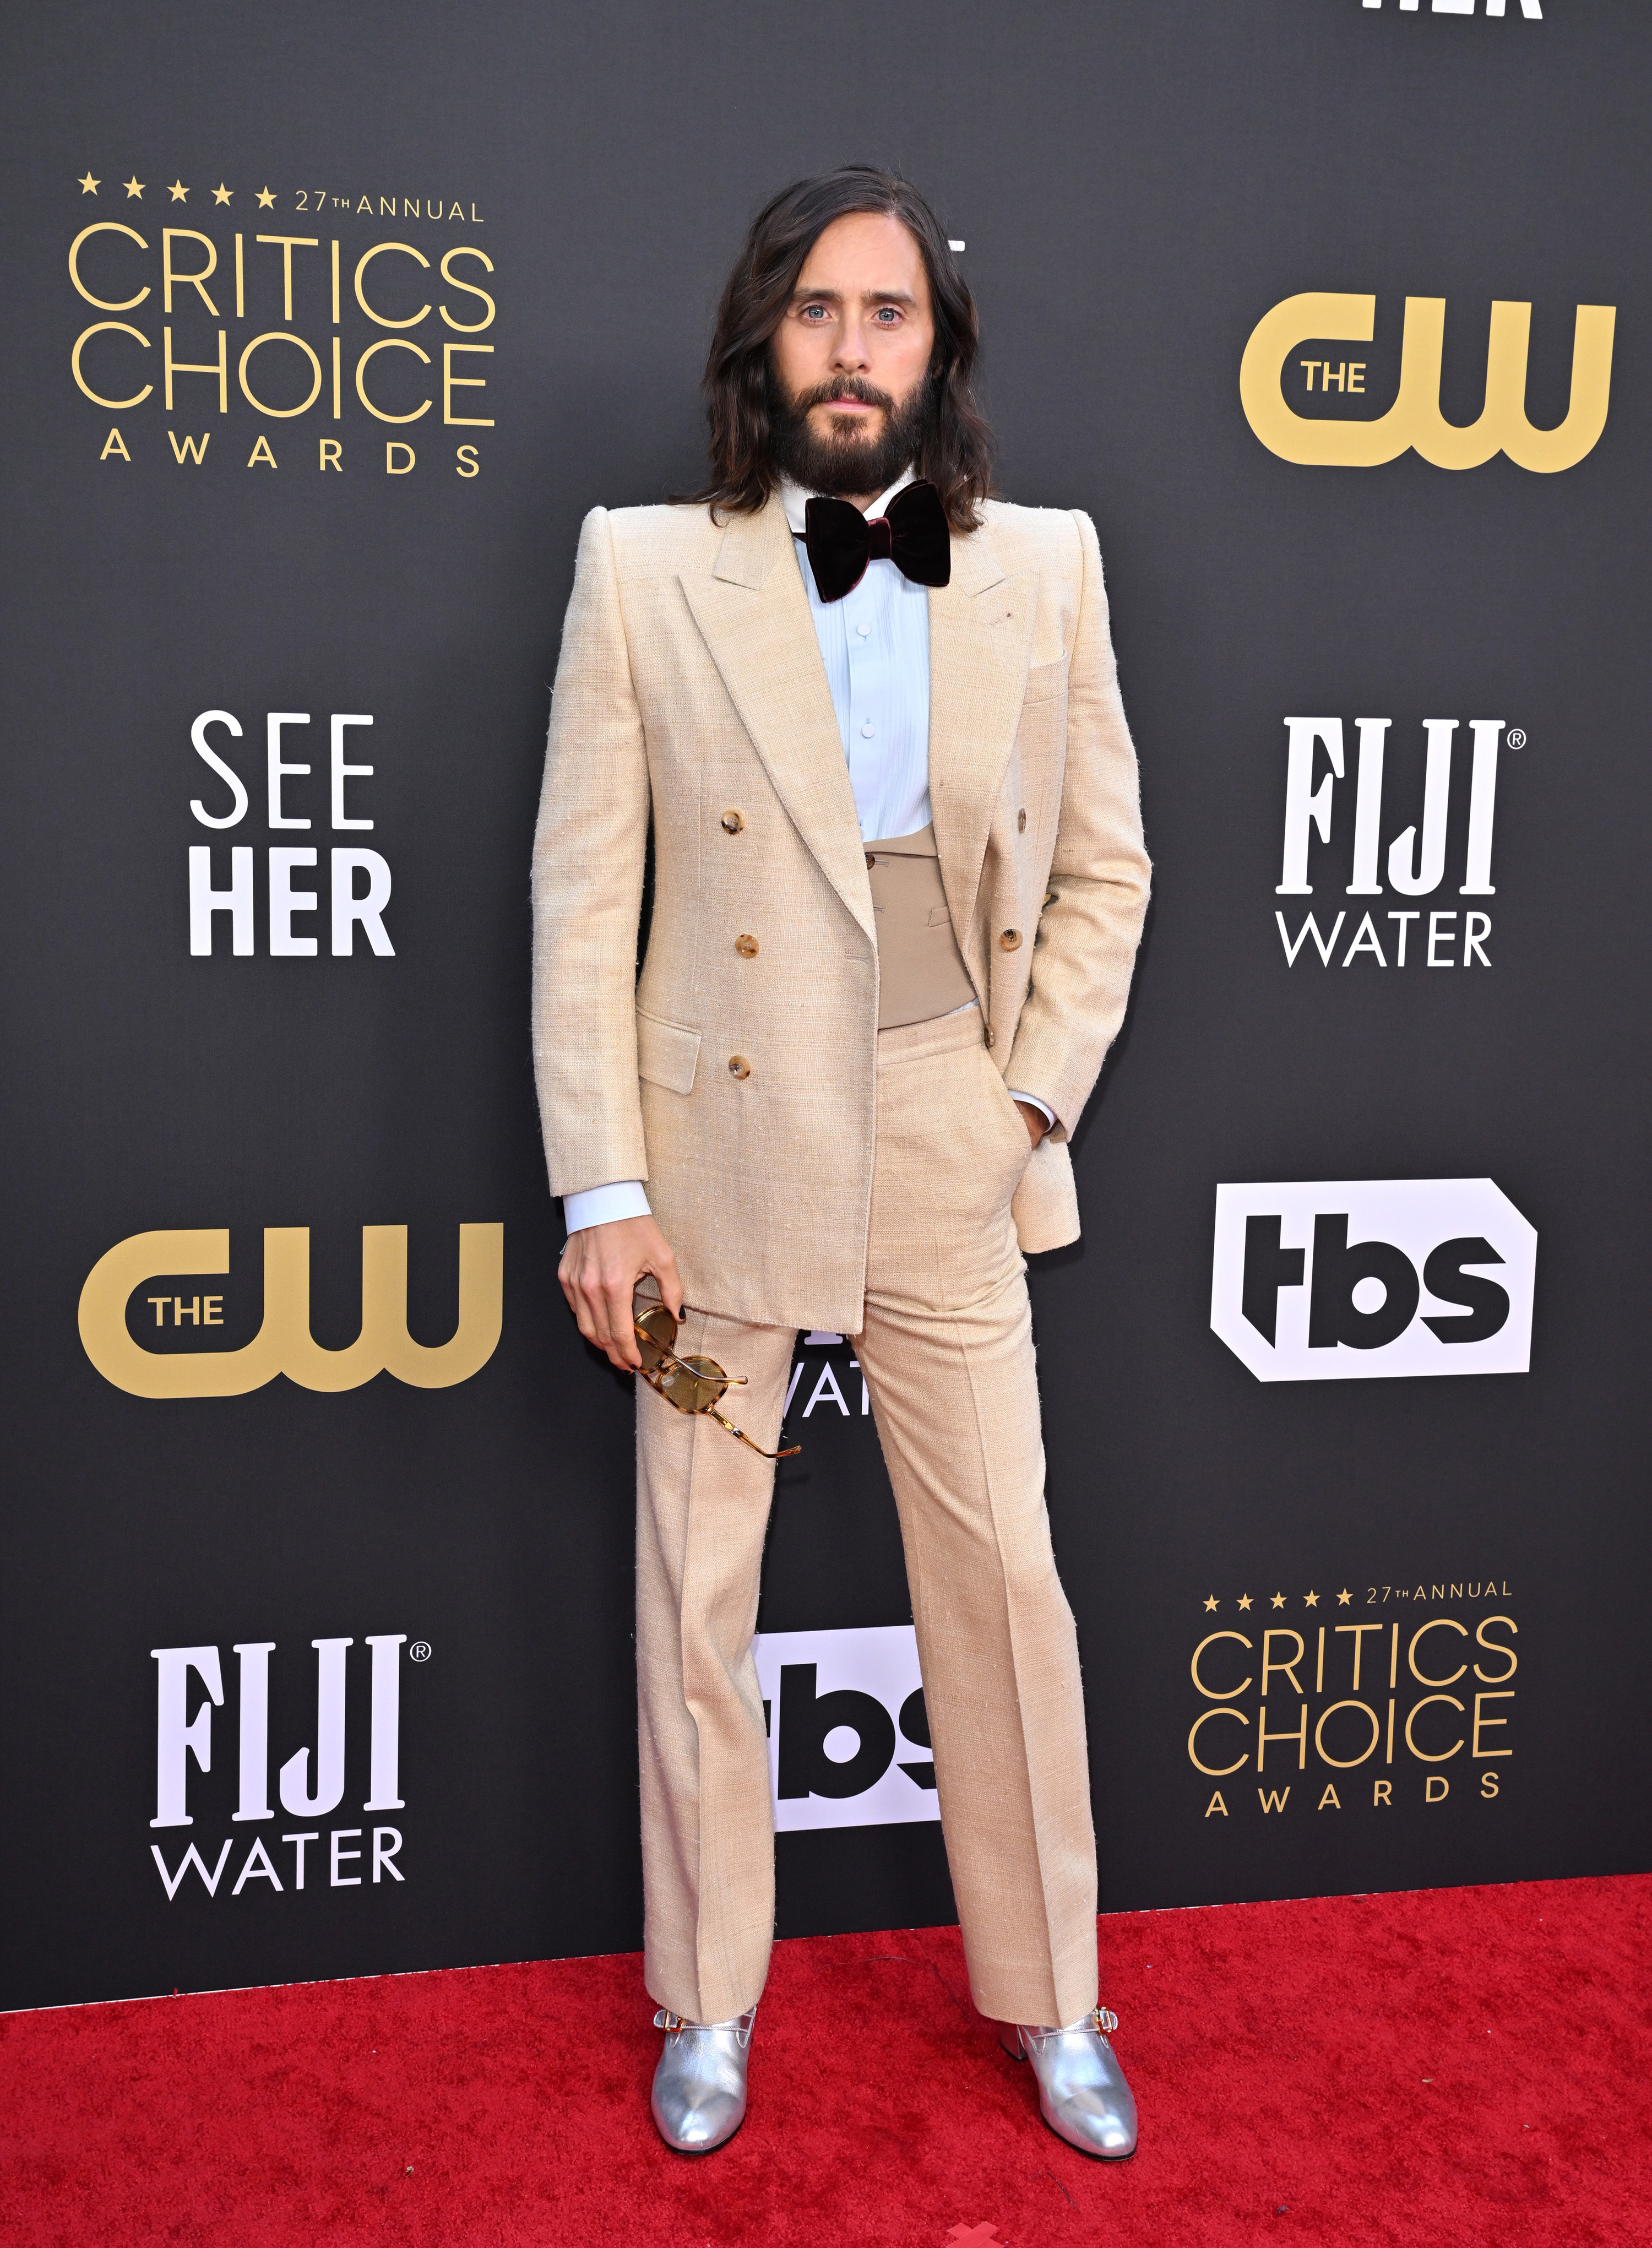 Jared wore a light-colored suit with an oversized bowtie